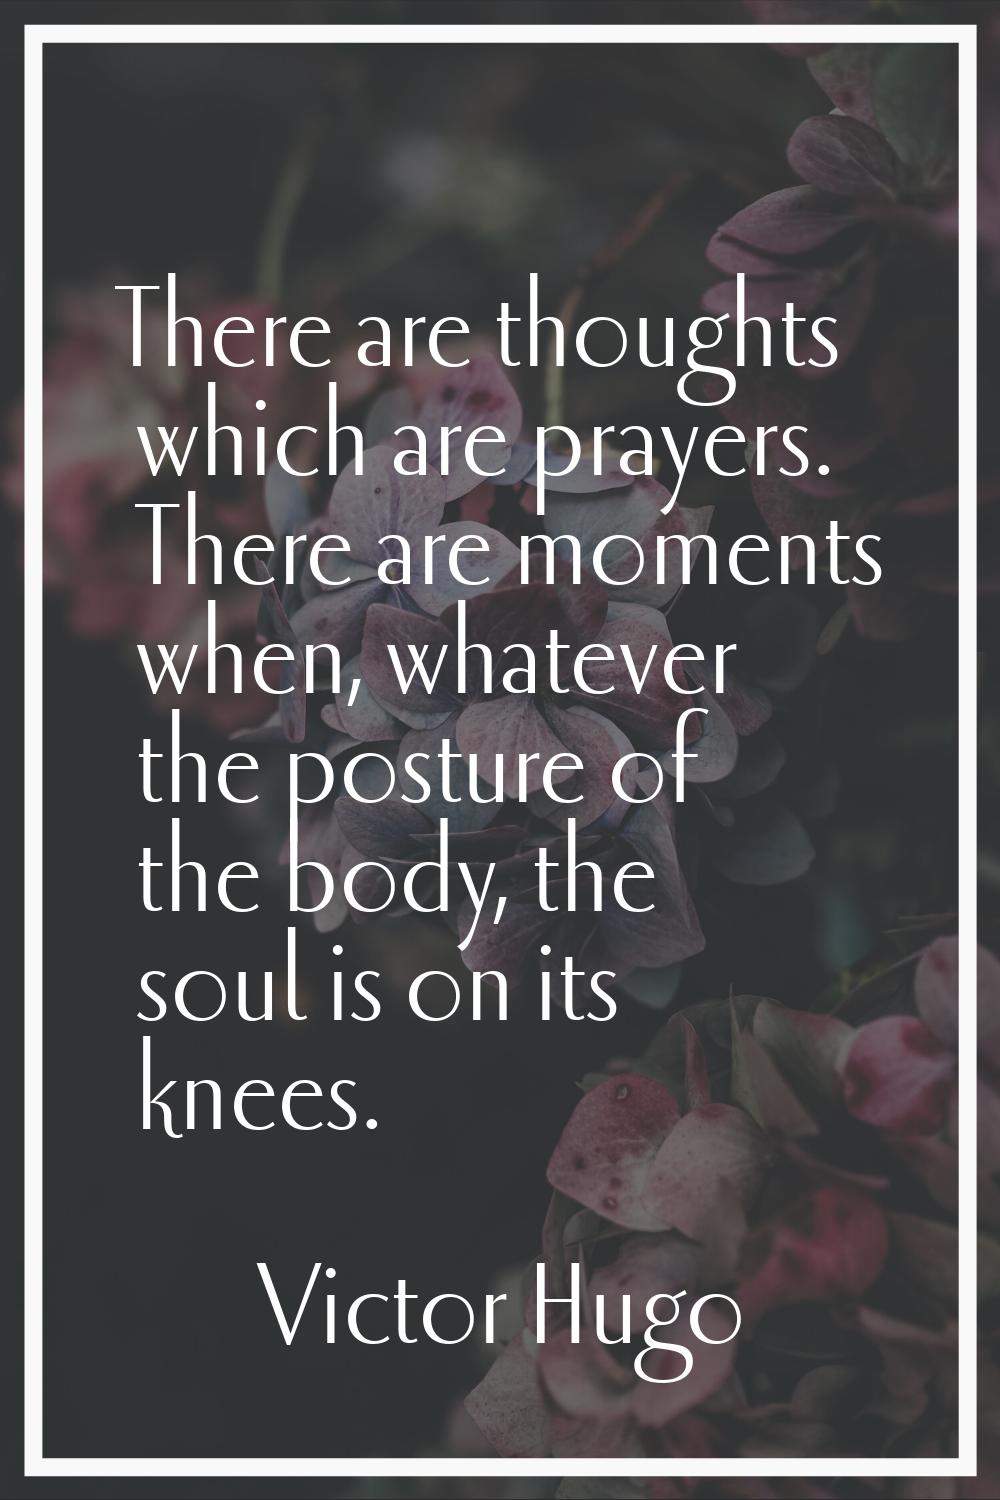 There are thoughts which are prayers. There are moments when, whatever the posture of the body, the